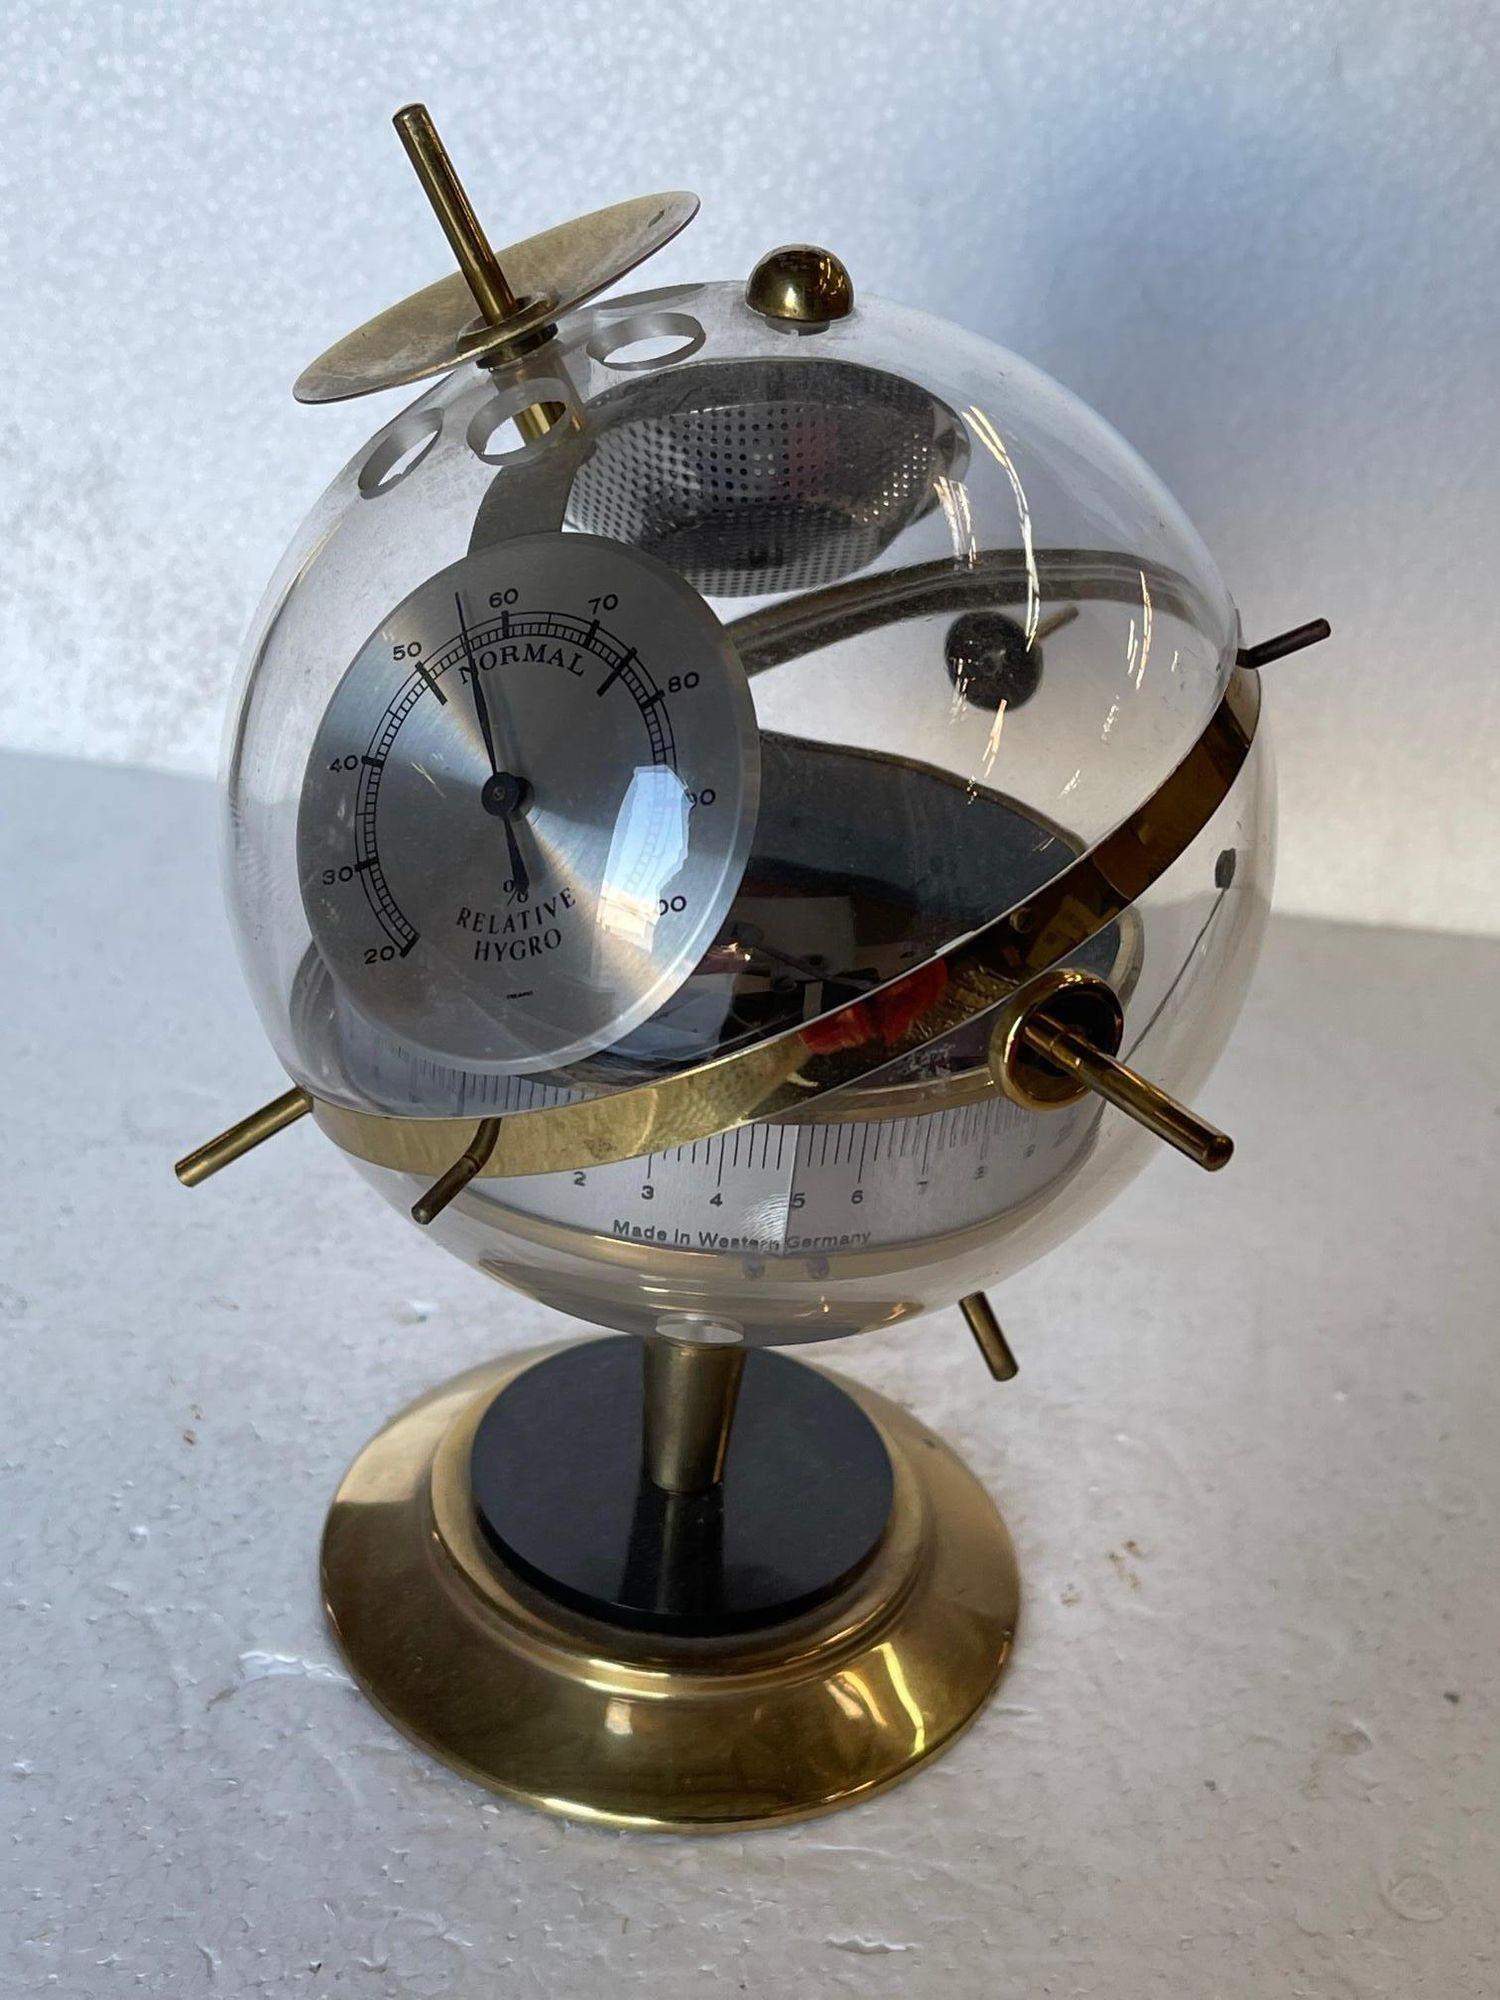 Mid Century German Made acrylic and brass Weather Station Relative Hygrometer this sphere with Barometer Hygrometer & Thermometer.

West Germany, circa 1960